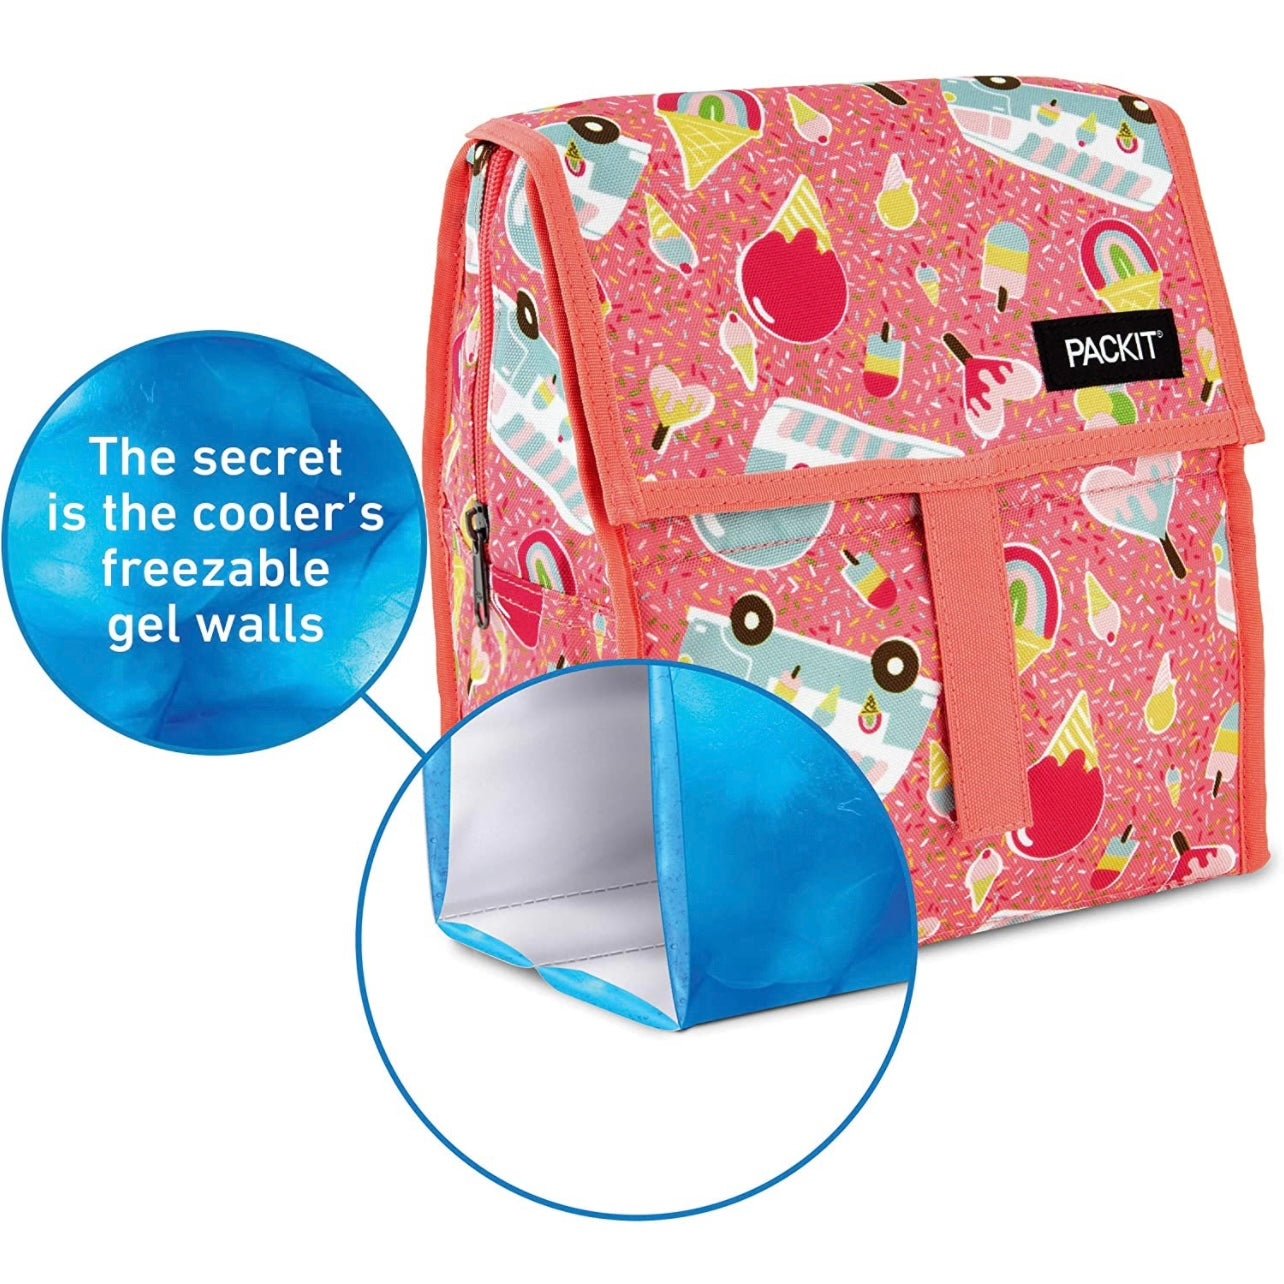 PackIt Brand, Tie-Dye Sorbet, Freezable, and Reusable Lunch Bag